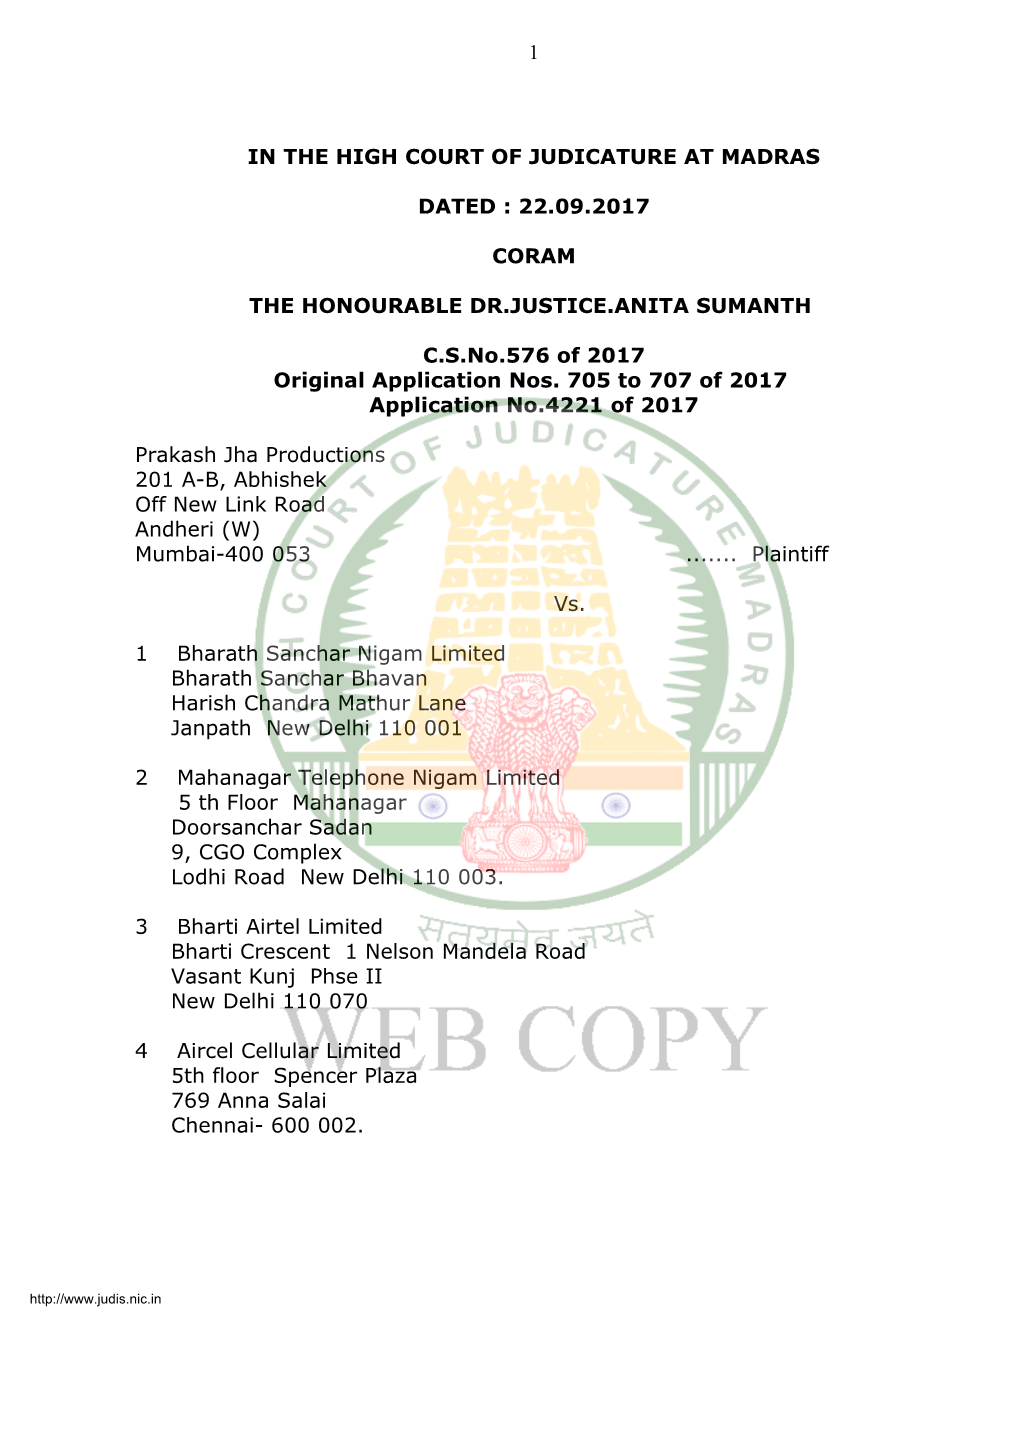 22.09.2017 CORAM the HONOURABLE DR.JUSTICE.ANITA SUMANTH Csno.576 of 2017